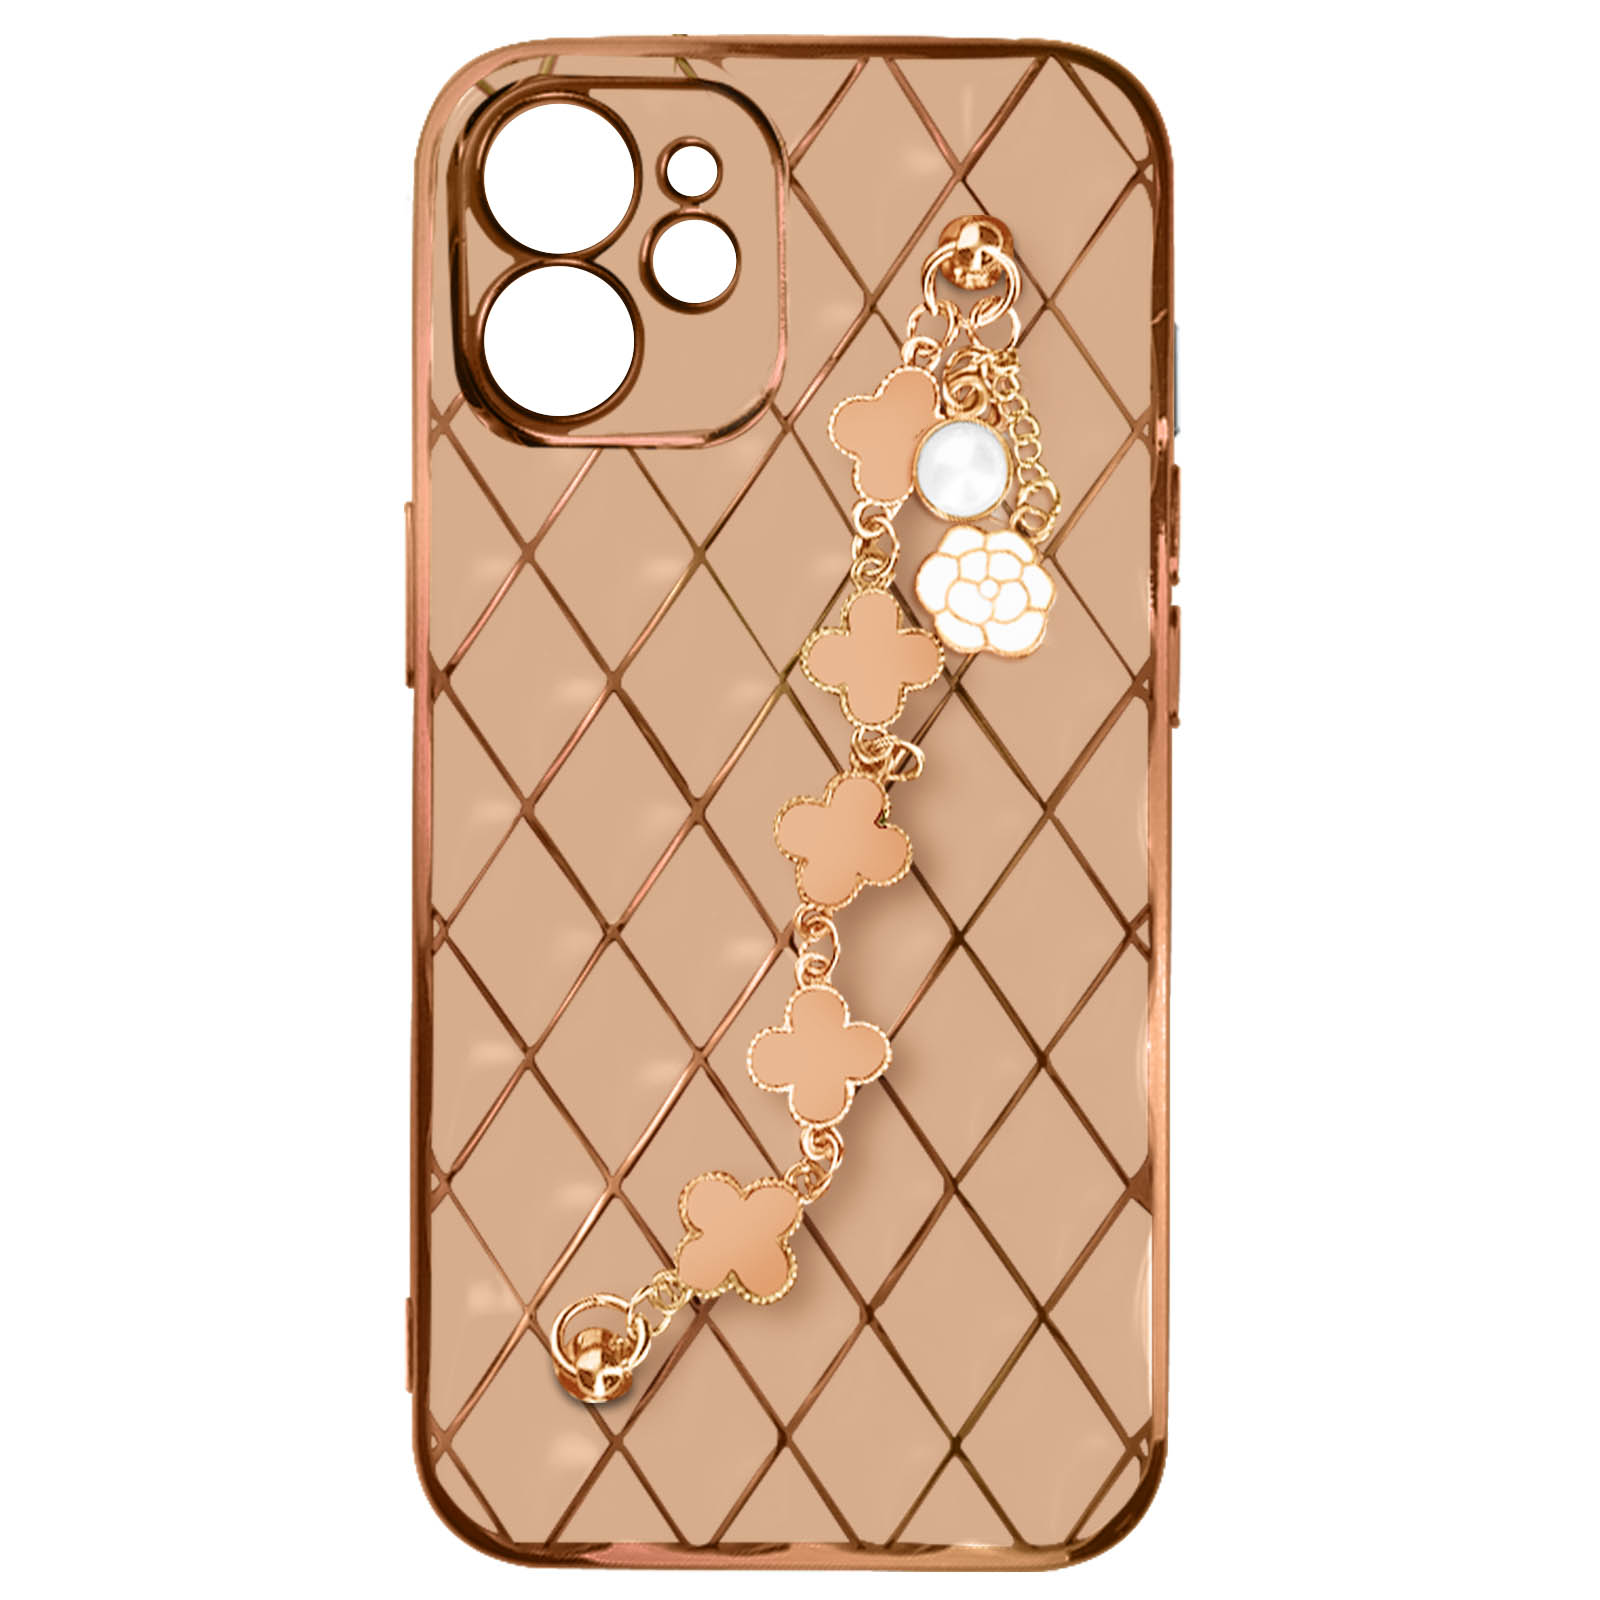 12, Backcover, iPhone Series, Trend Apple, AVIZAR Rosegold